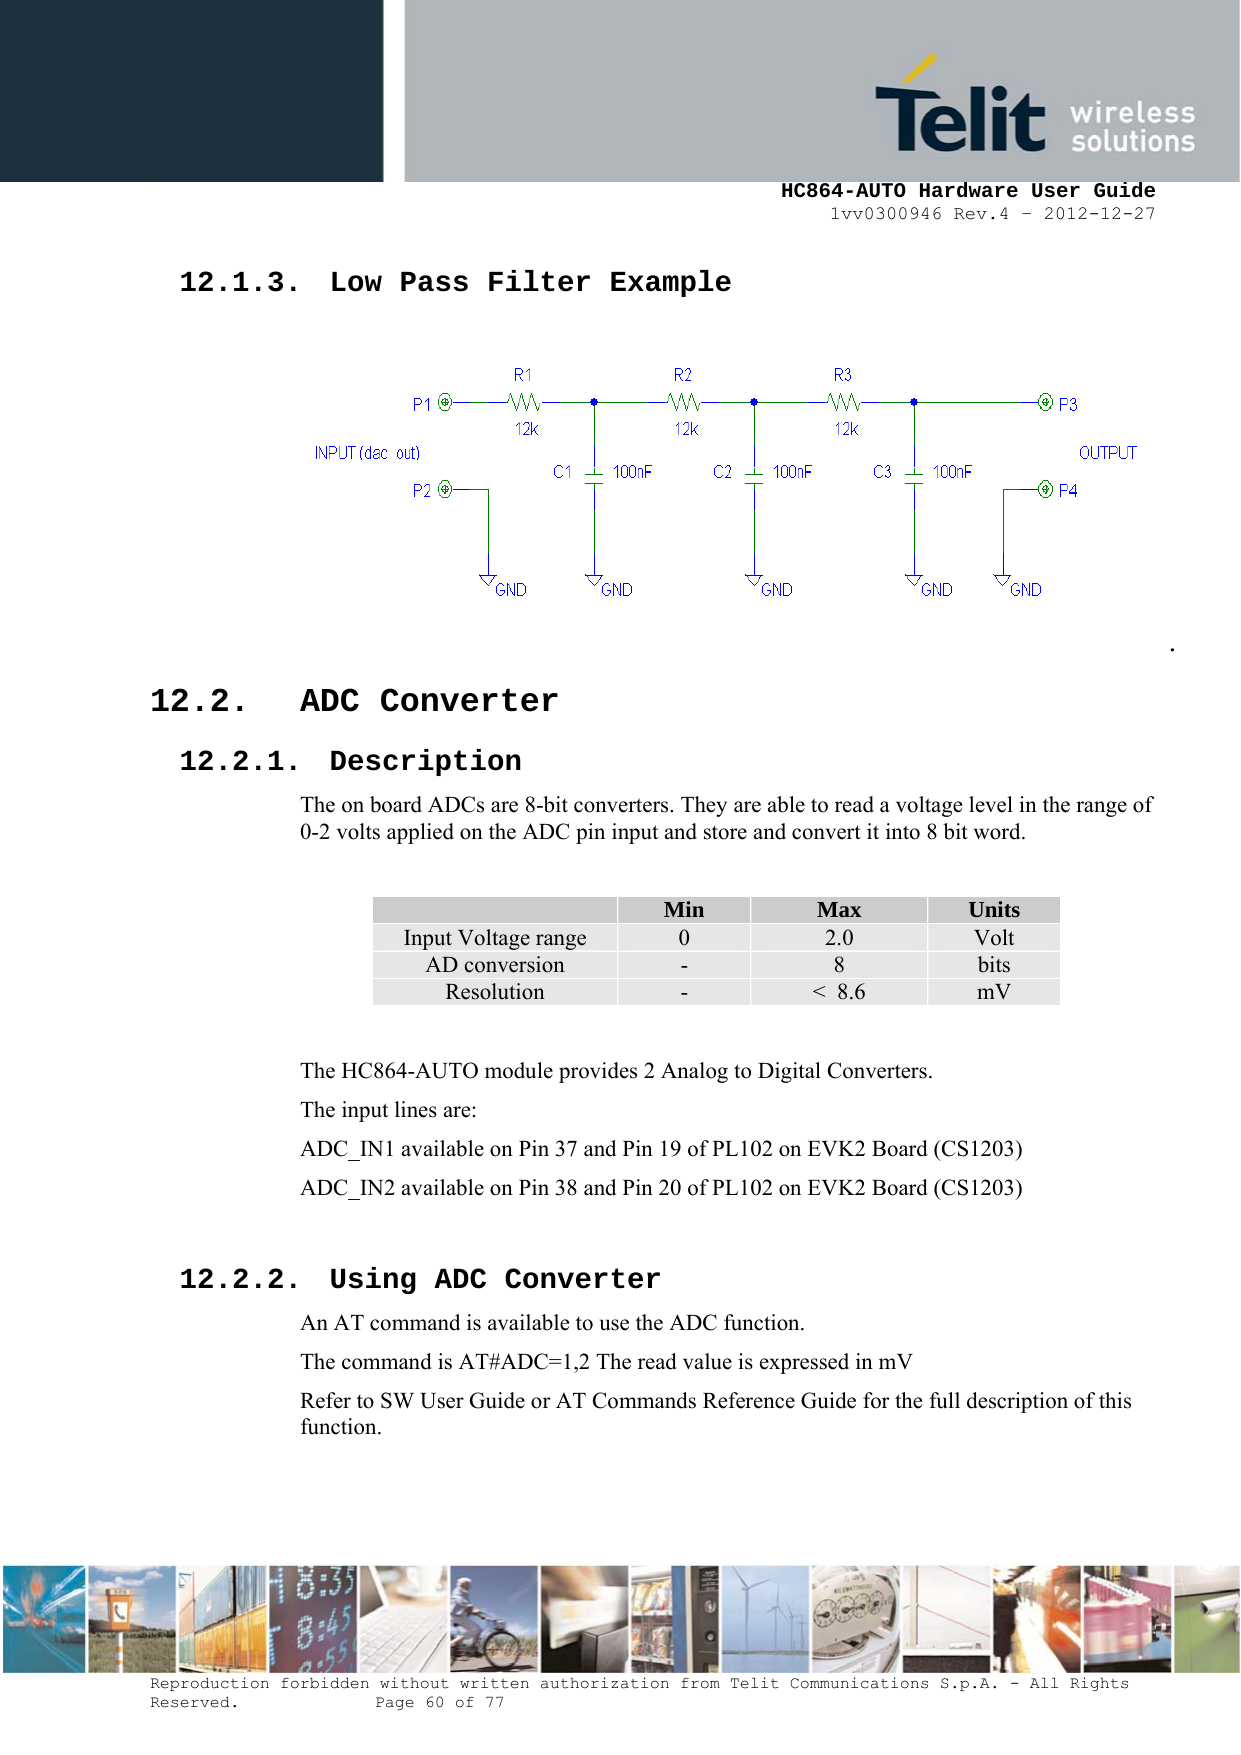     HC864-AUTO Hardware User Guide 1vv0300946 Rev.4 – 2012-12-27 Reproduction forbidden without written authorization from Telit Communications S.p.A. - All Rights Reserved.    Page 60 of 77  12.1.3. Low Pass Filter Example .  12.2. ADC Converter 12.2.1. Description The on board ADCs are 8-bit converters. They are able to read a voltage level in the range of 0-2 volts applied on the ADC pin input and store and convert it into 8 bit word.   Min  Max  Units Input Voltage range  0  2.0  Volt AD conversion  -  8  bits Resolution  -  &lt;  8.6  mV  The HC864-AUTO module provides 2 Analog to Digital Converters.  The input lines are: ADC_IN1 available on Pin 37 and Pin 19 of PL102 on EVK2 Board (CS1203) ADC_IN2 available on Pin 38 and Pin 20 of PL102 on EVK2 Board (CS1203)  12.2.2. Using ADC Converter An AT command is available to use the ADC function.  The command is AT#ADC=1,2 The read value is expressed in mV Refer to SW User Guide or AT Commands Reference Guide for the full description of this function.  